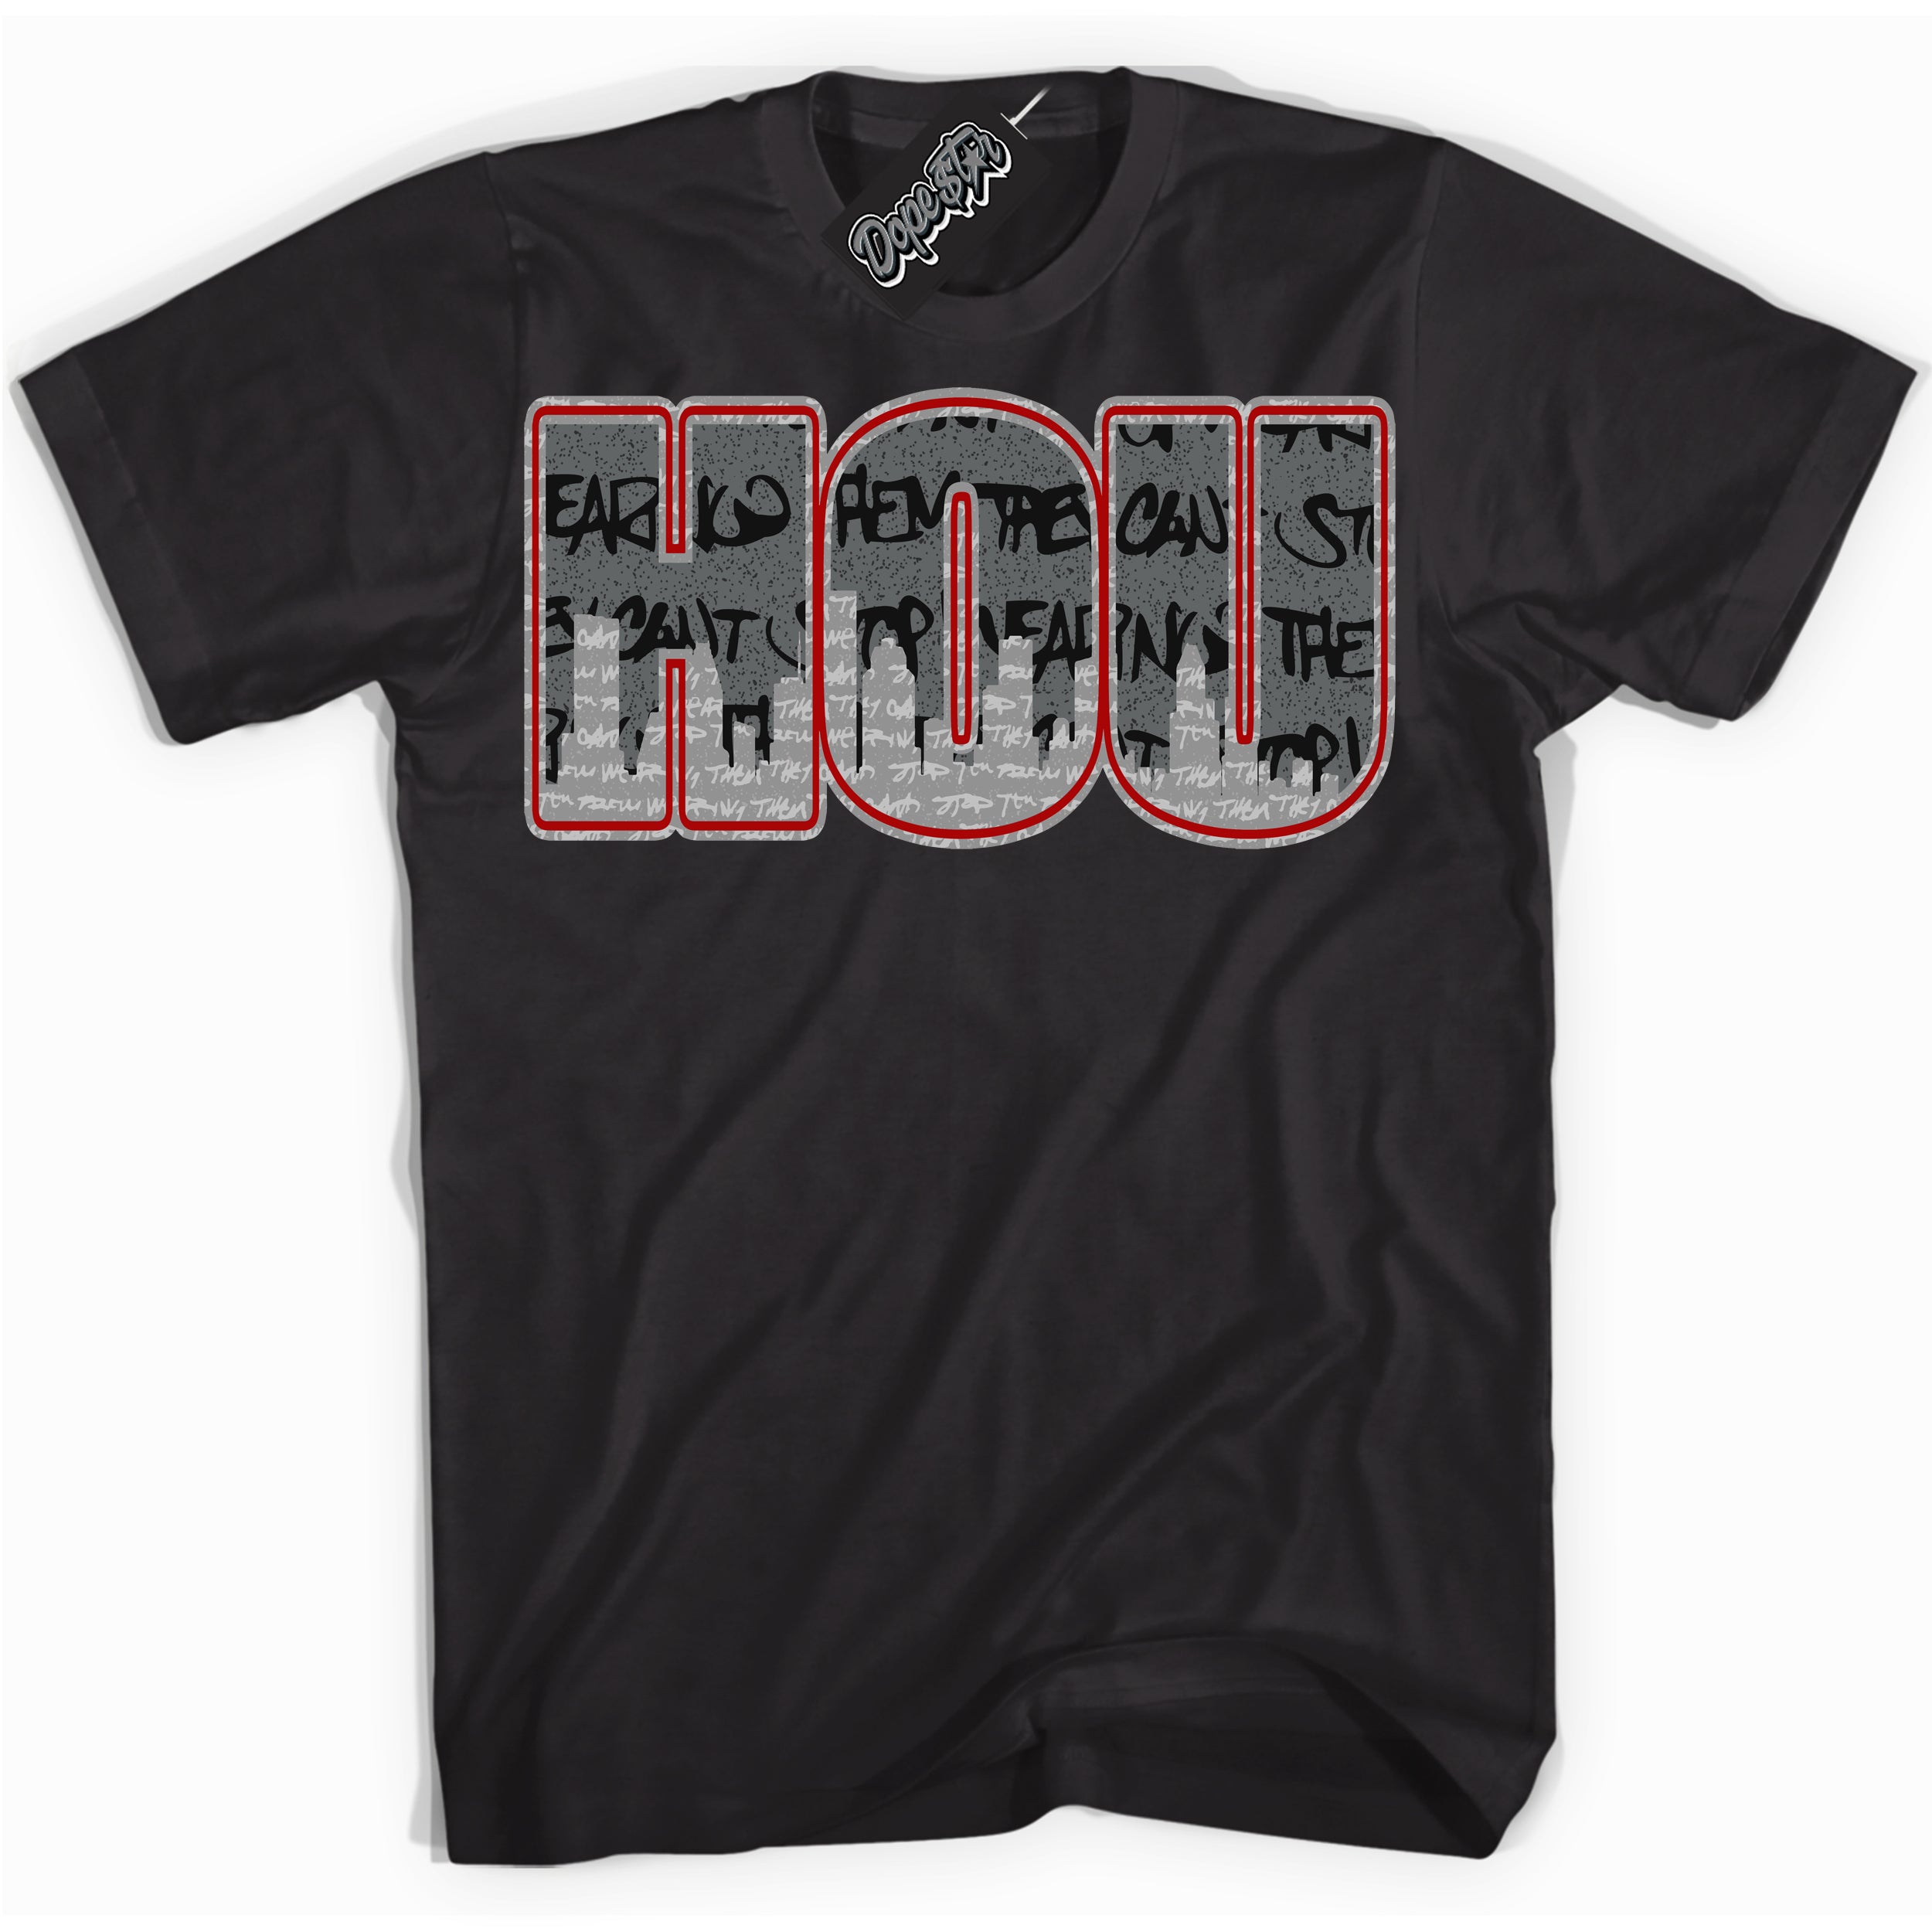 Cool Black Shirt with “ Houston ” design that perfectly matches Rebellionaire 1s Sneakers.